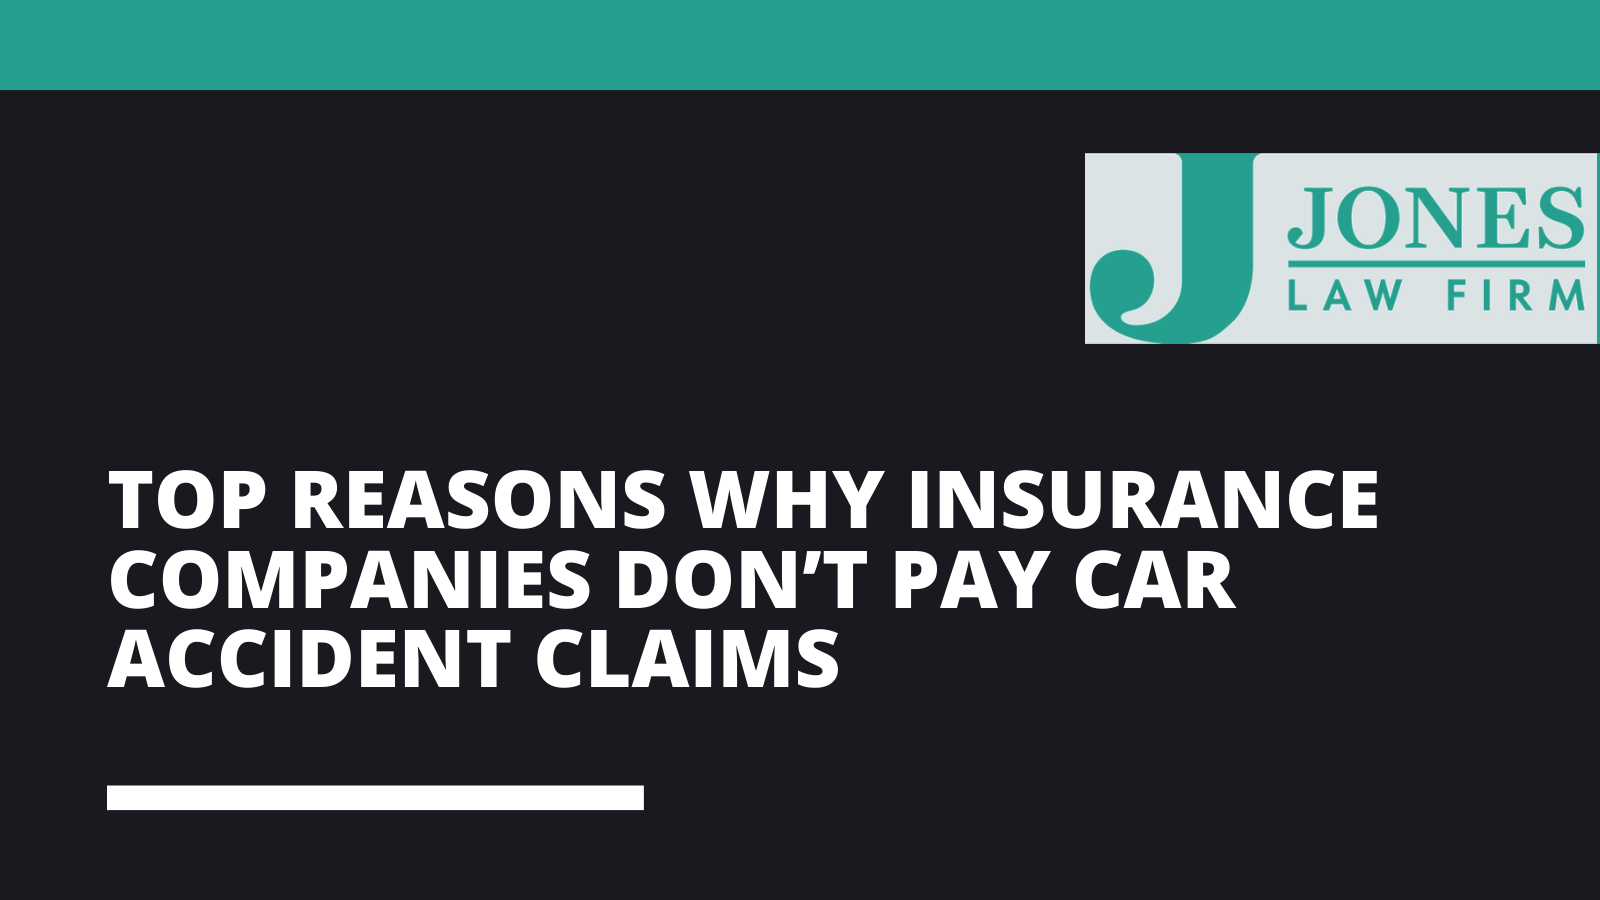 Top Reasons Why Insurance Companies Don’t Pay Car Accident Claims - Jones law firm - Alexandria louisiana